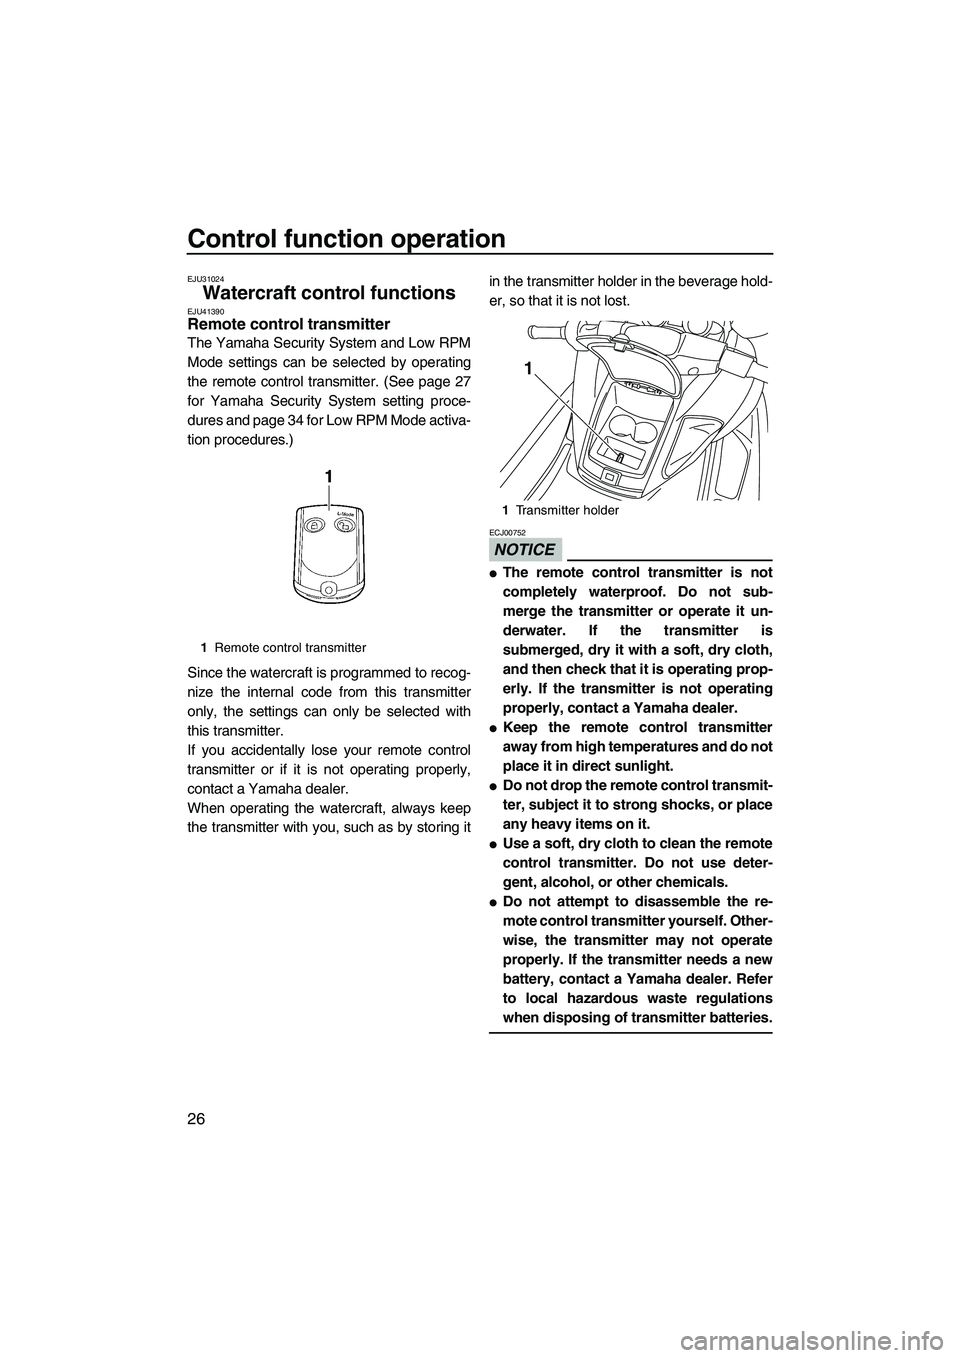 YAMAHA FZS 2013 Owners Guide Control function operation
26
EJU31024
Watercraft control functions EJU41390Remote control transmitter 
The Yamaha Security System and Low RPM
Mode settings can be selected by operating
the remote con